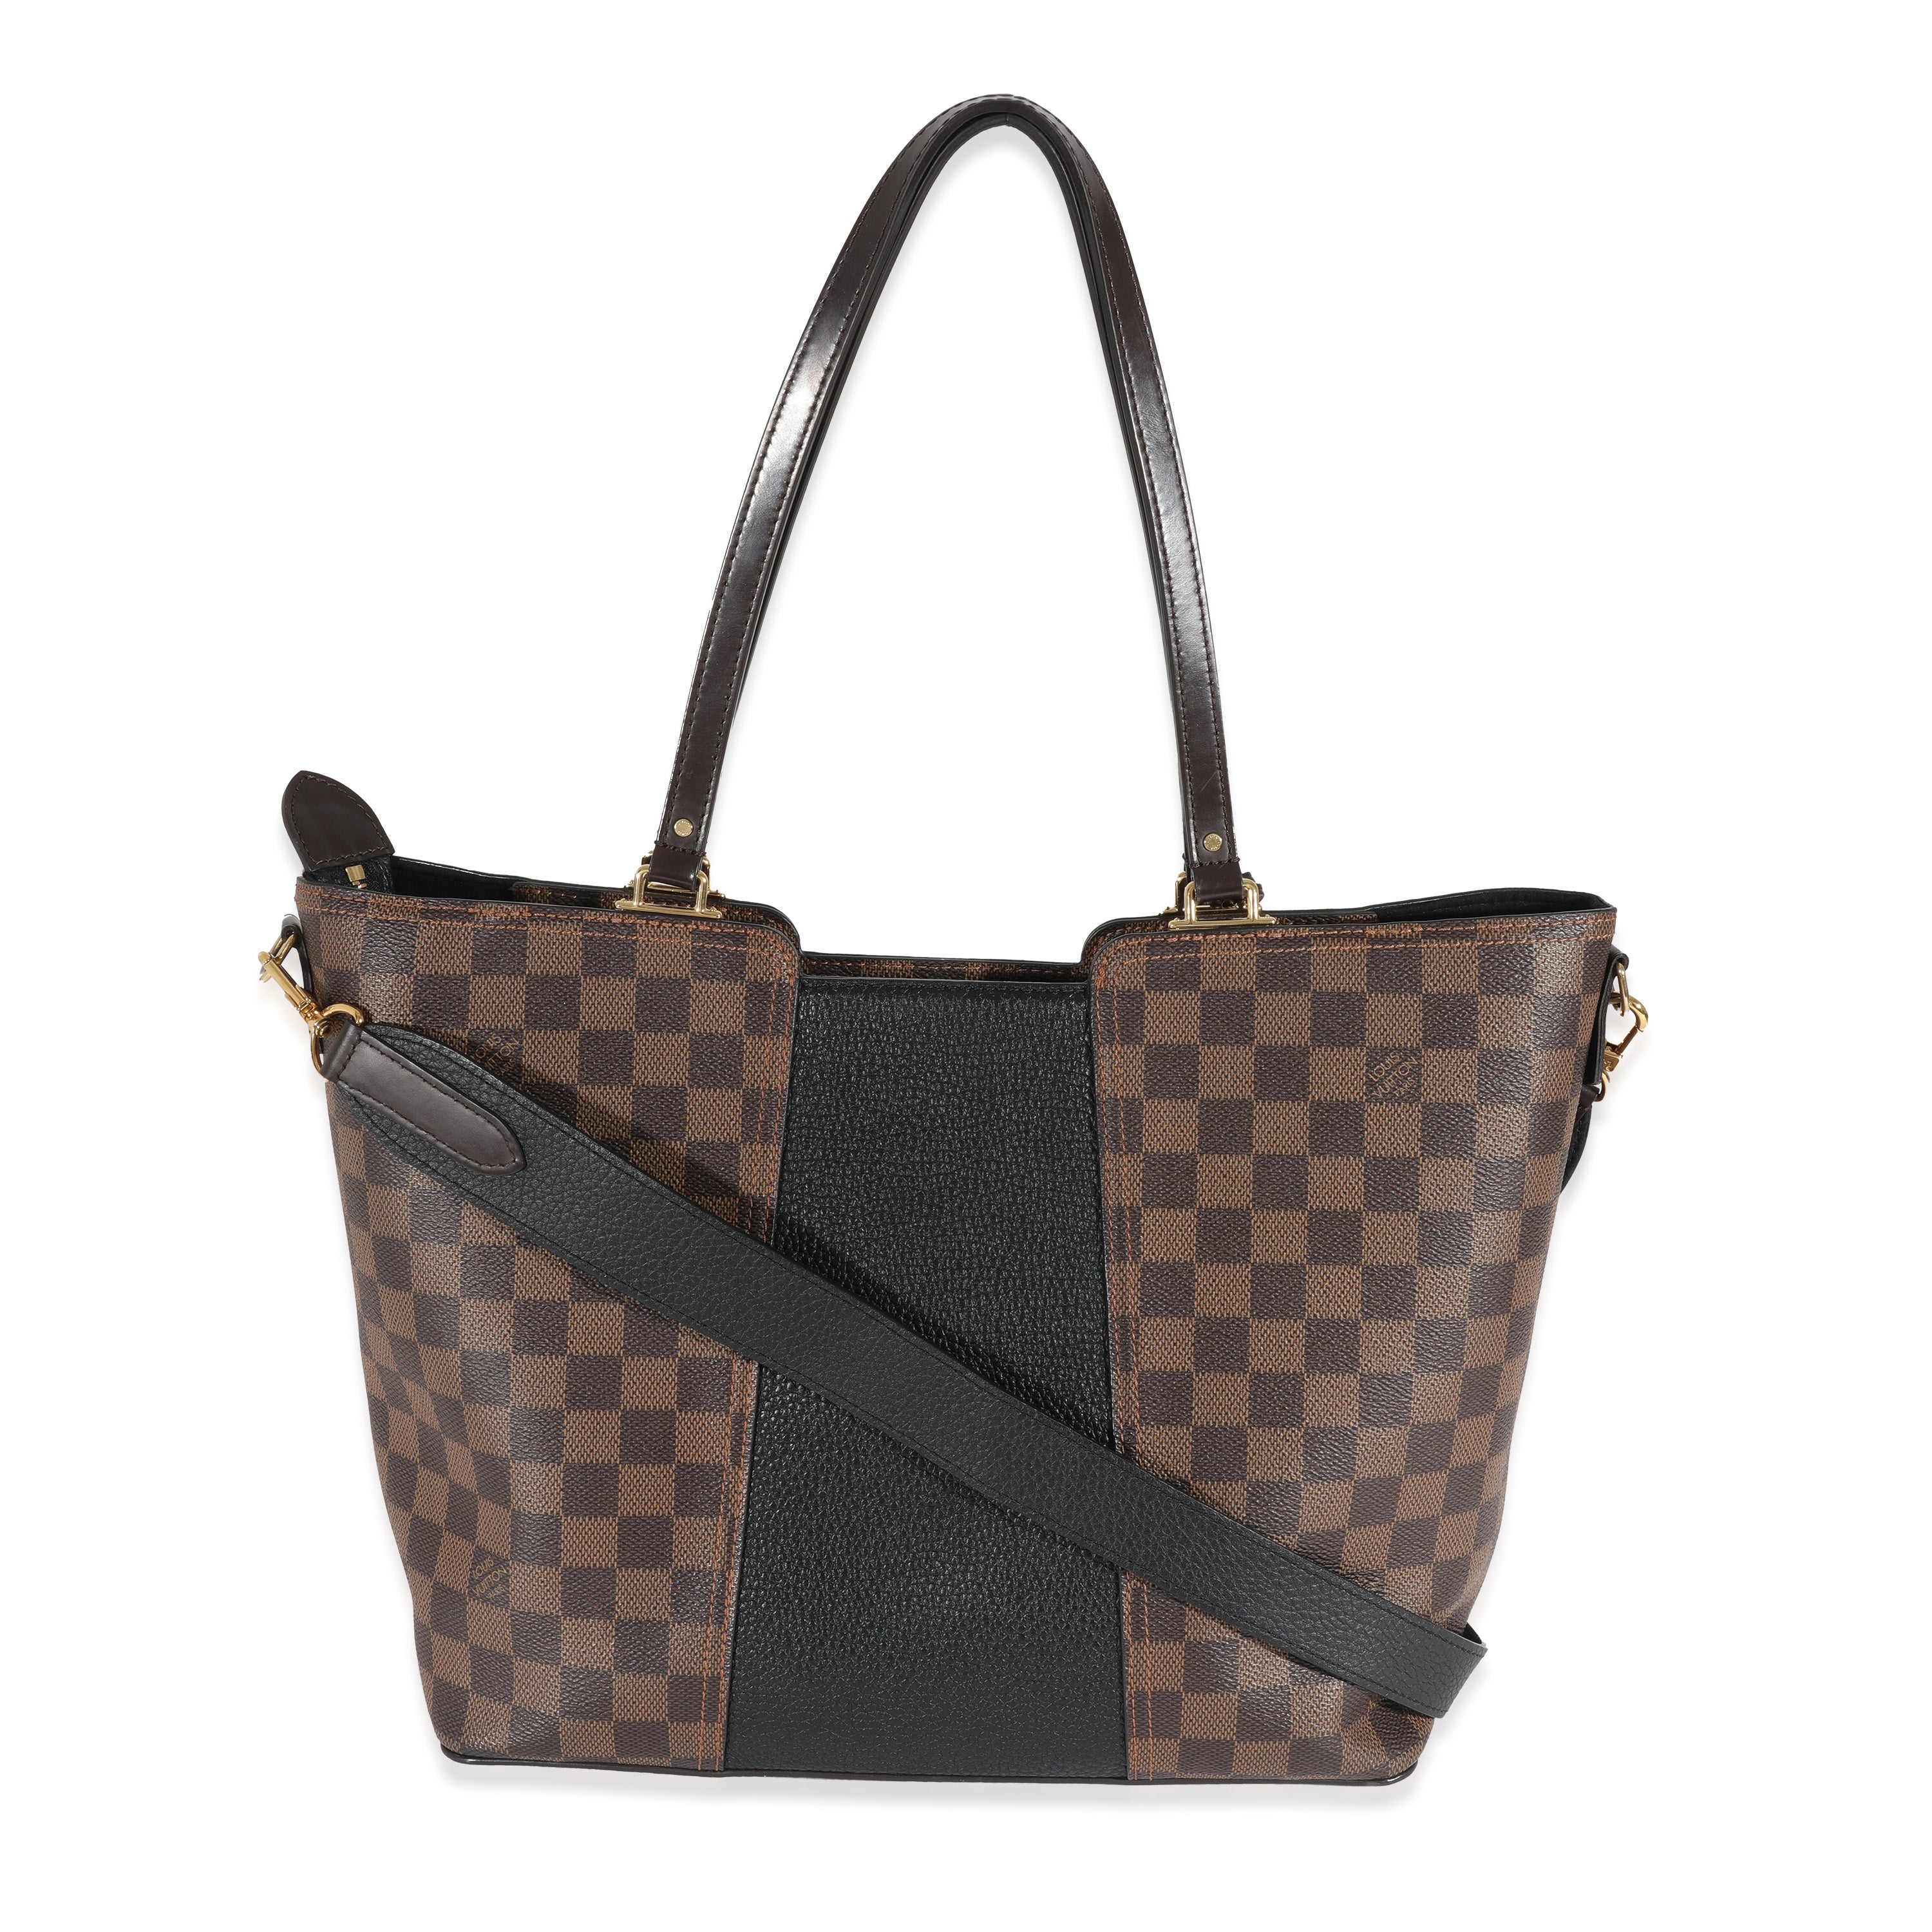 Louis Vuitton Canvas Damier Ebene Taurillon Jersey Tote - Handbag | Pre-owned & Certified | used Second Hand | Unisex